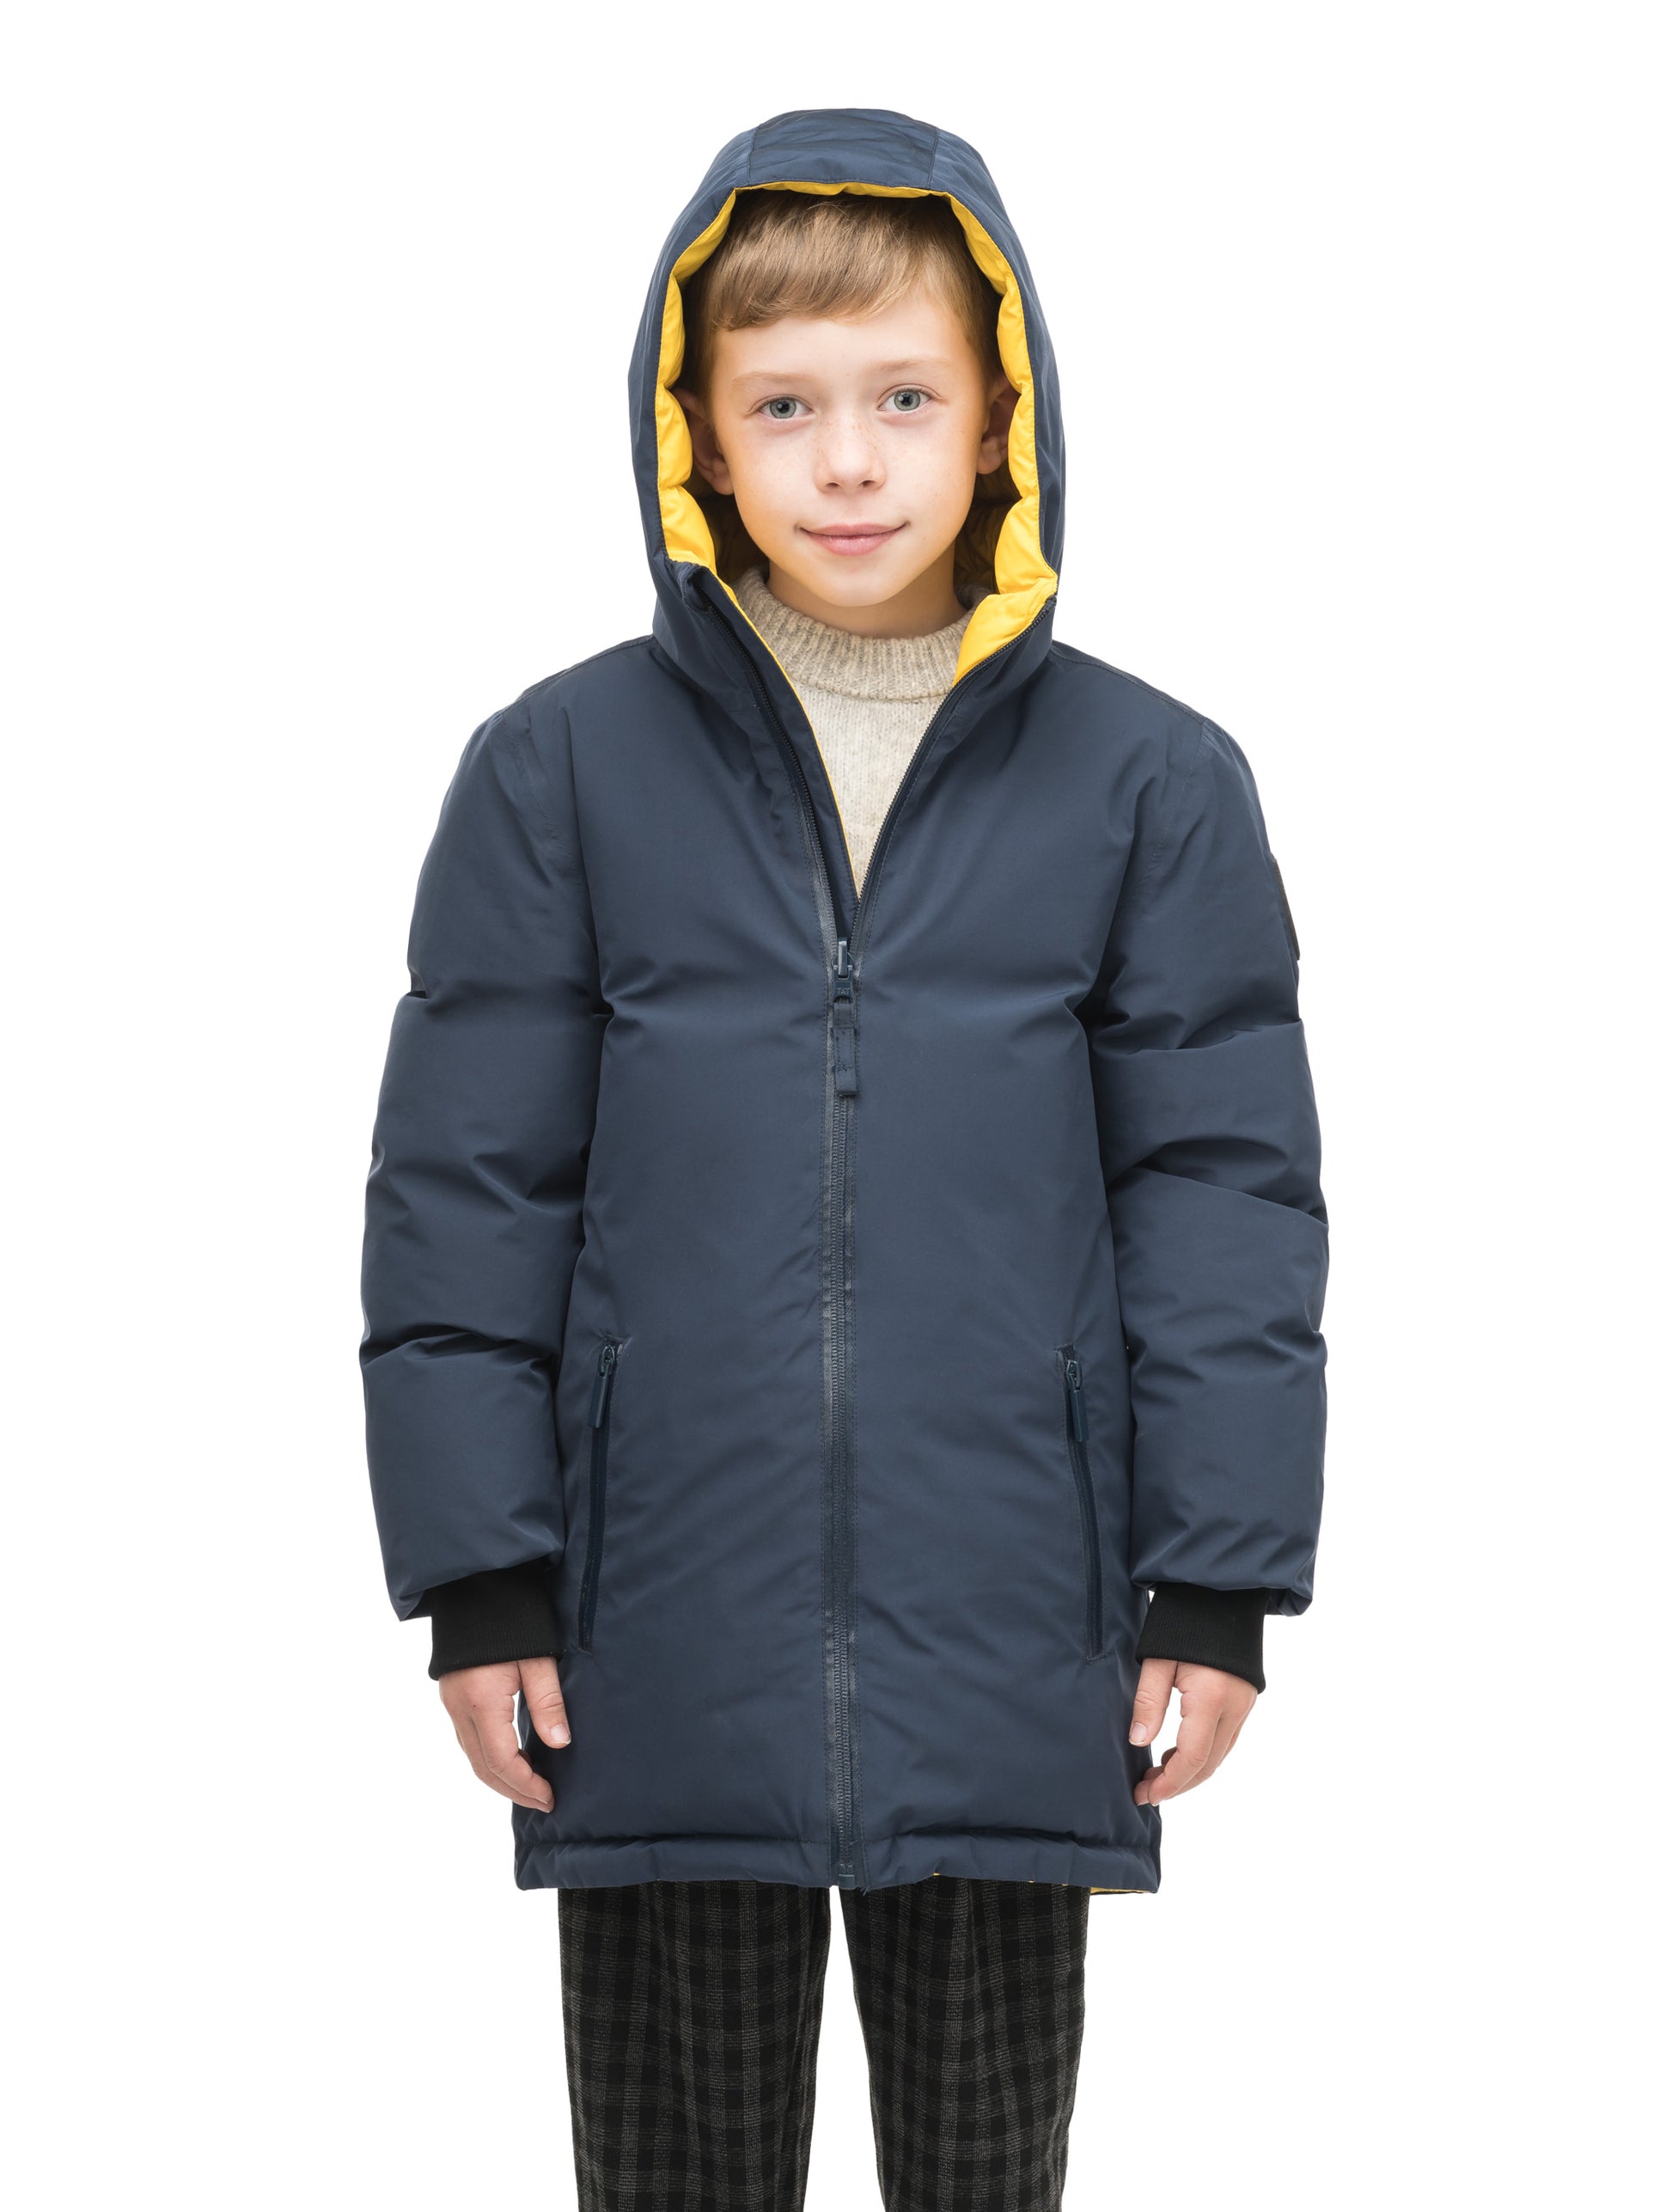 Kids' reversible knee length, down filled parka with waterproof finish in Marine/Citron